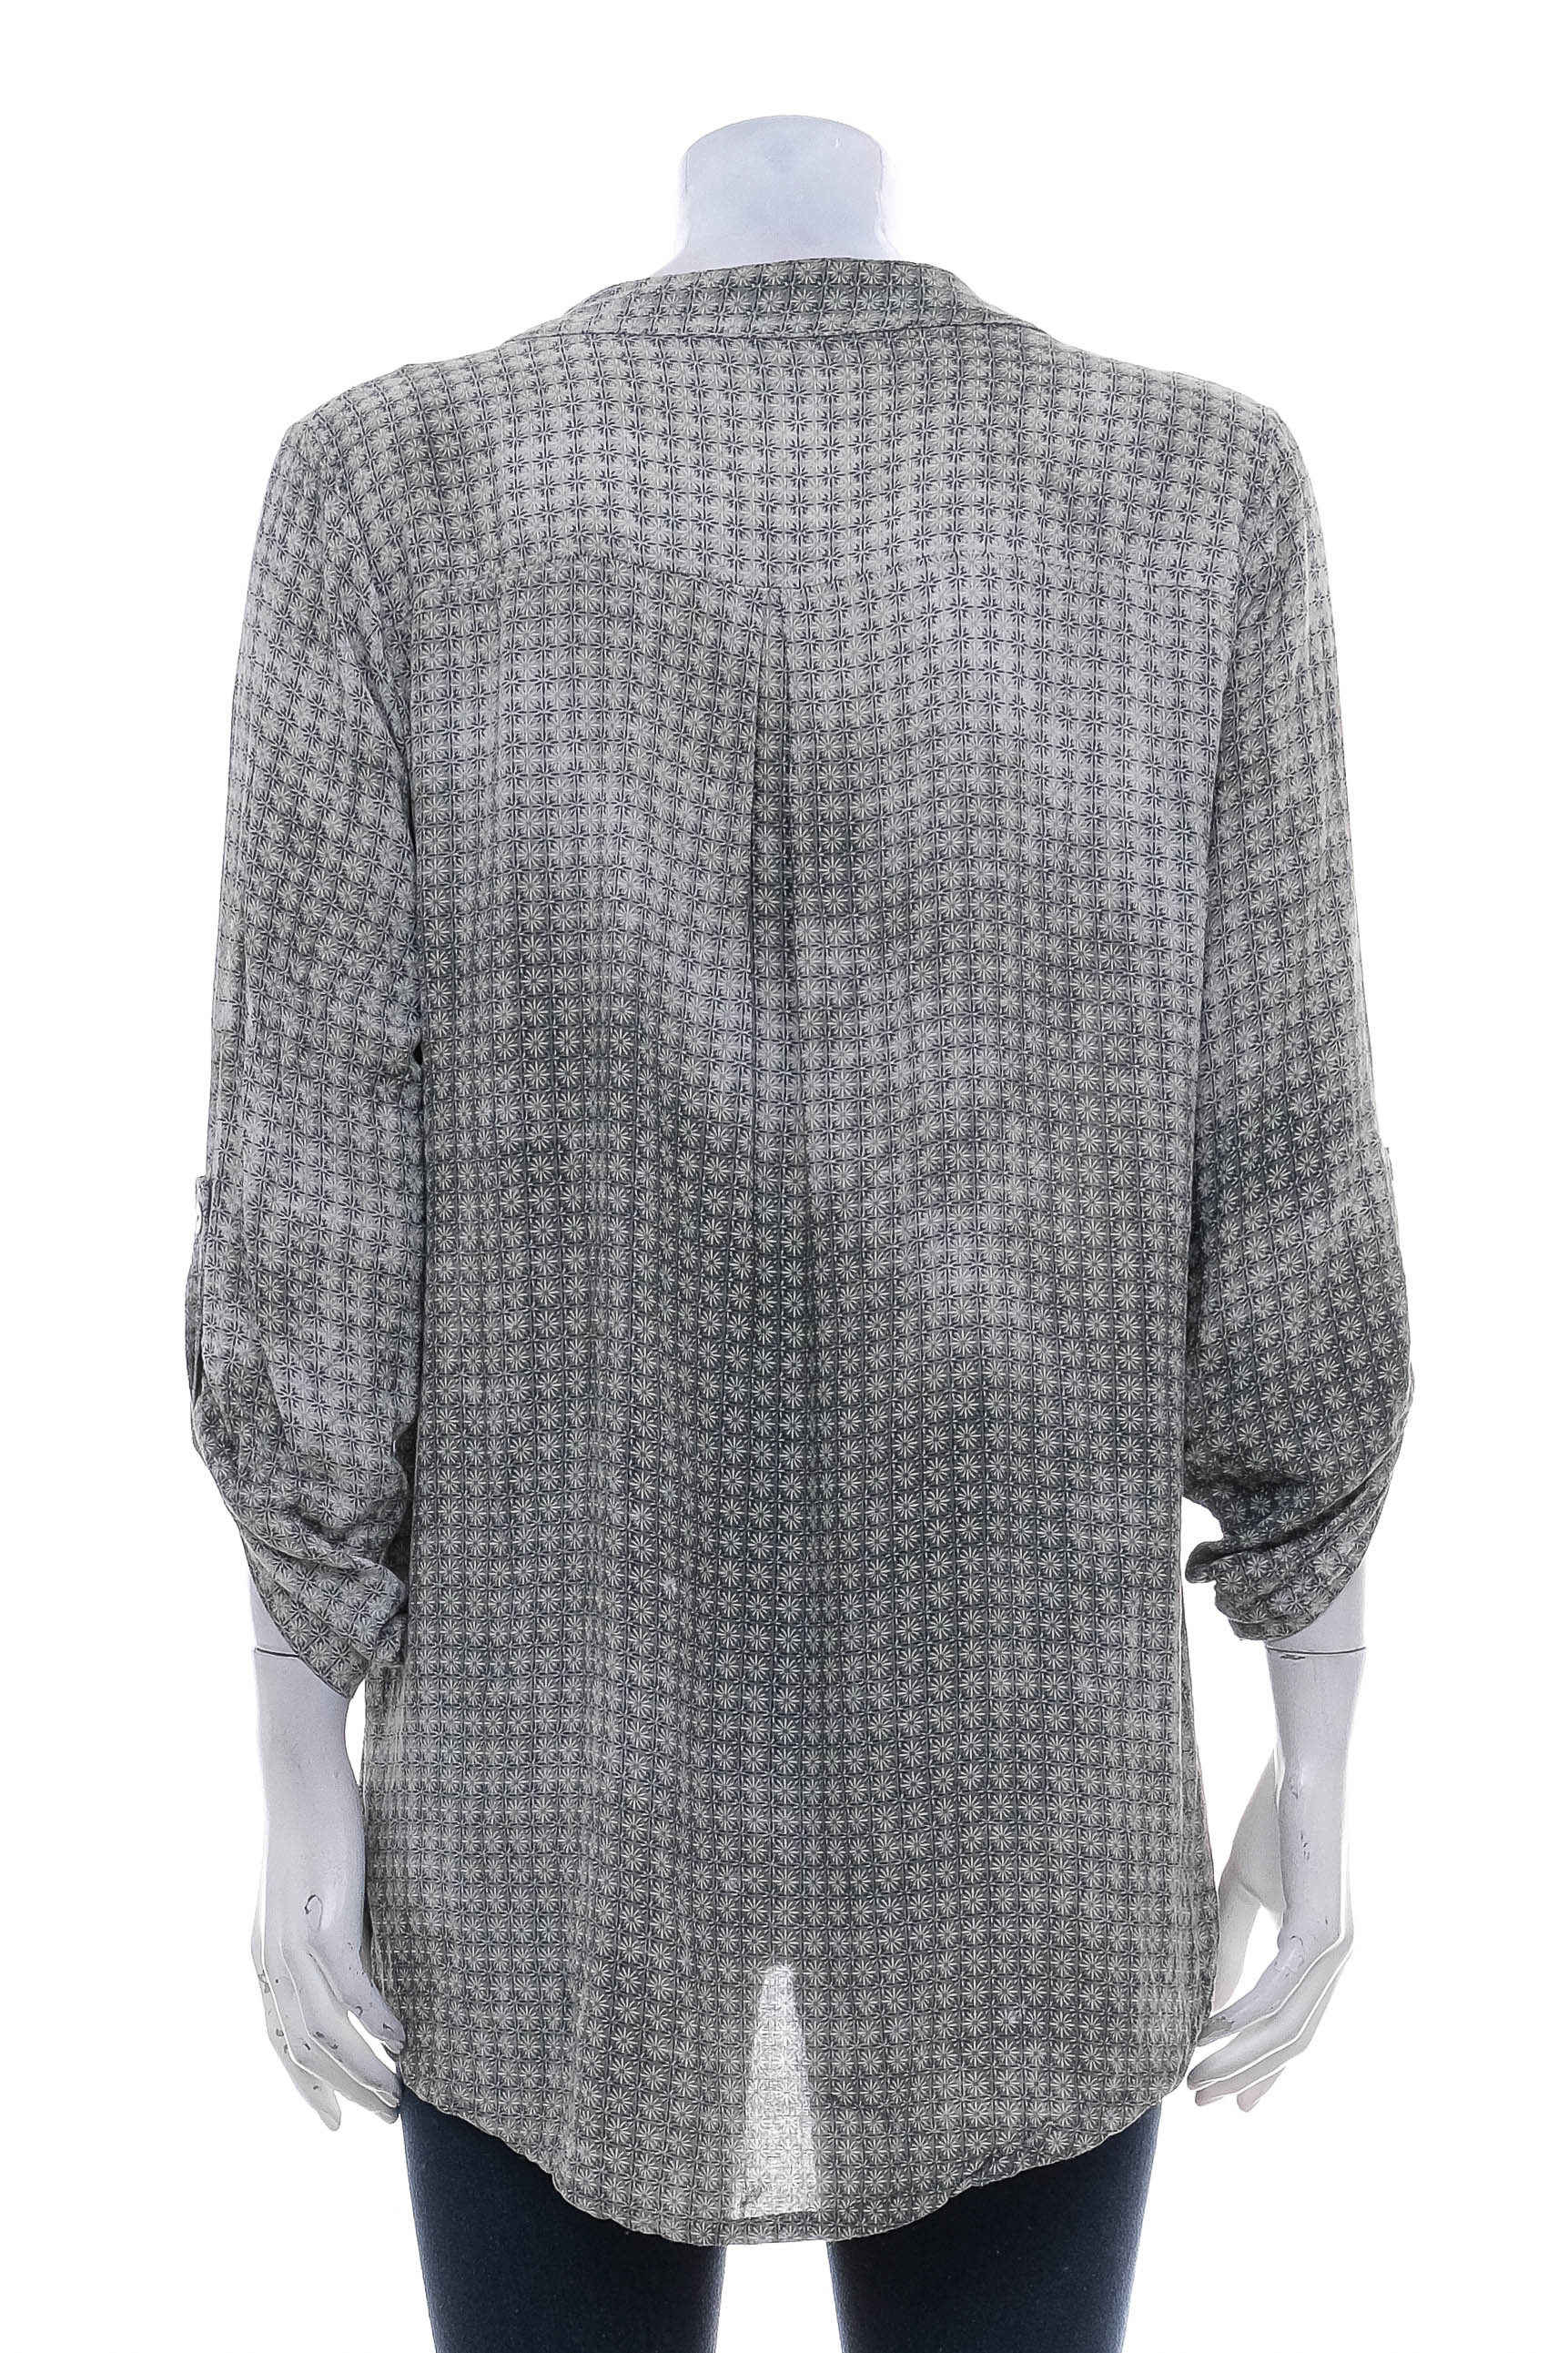 Women's shirt - Made in Italy - 1